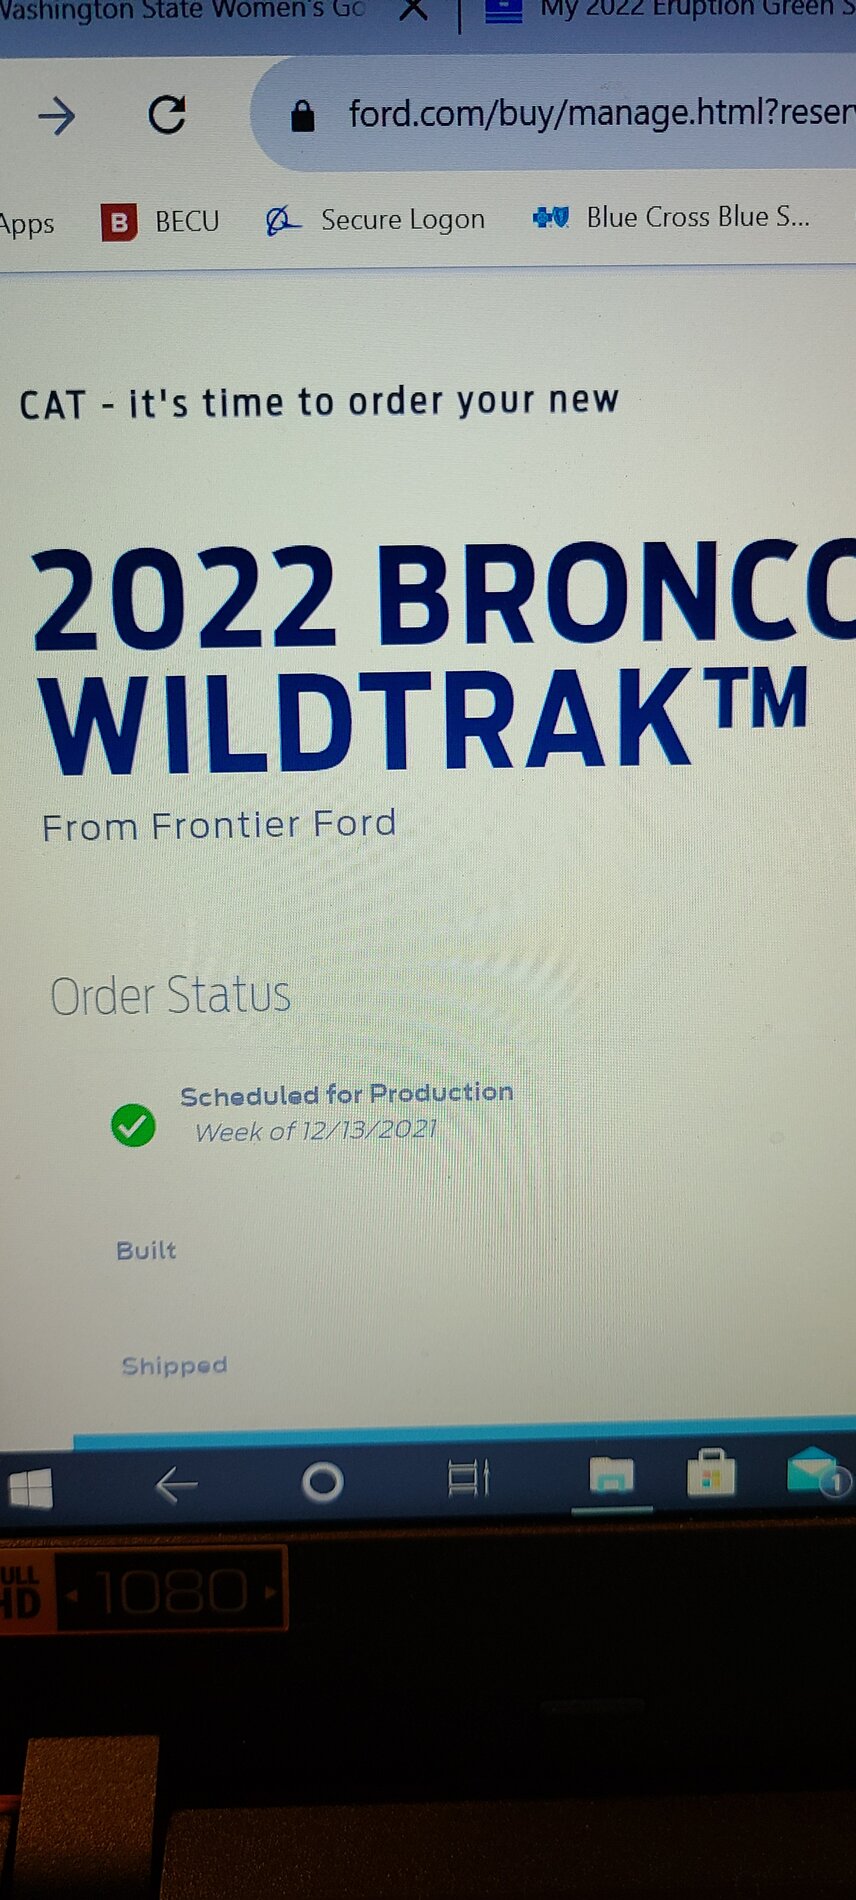 Ford Bronco My 2022 Eruption Green Scheduled for December production 16354630608771158718619438161025